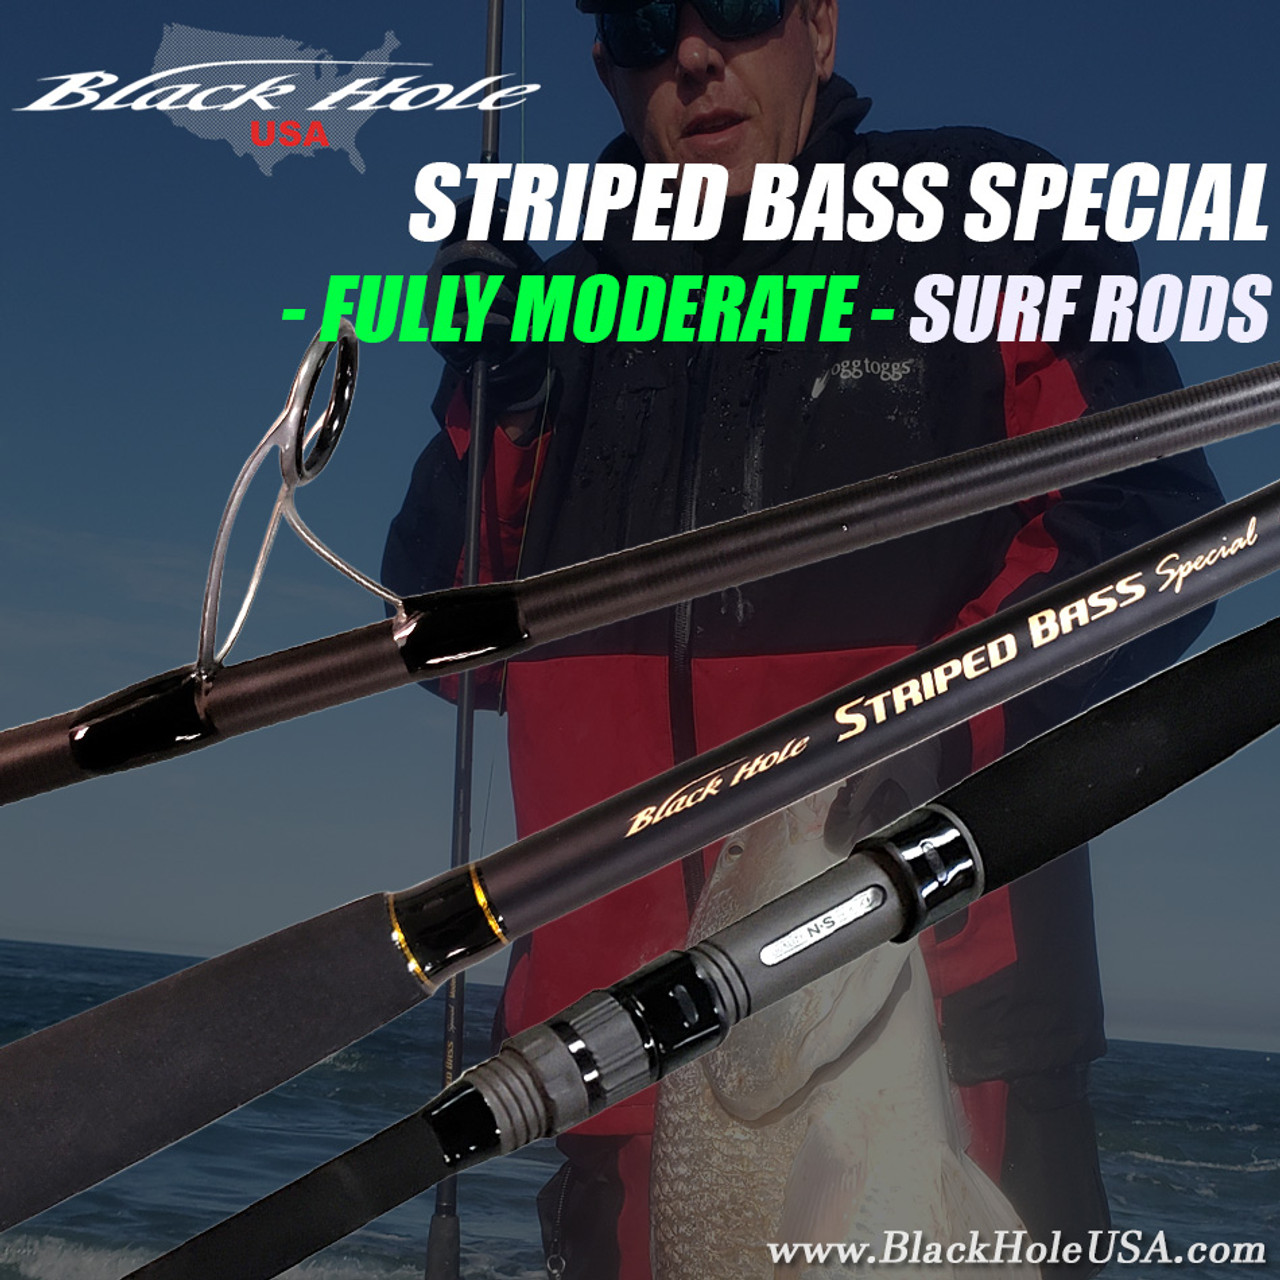 Black Hole USA Striped Bass Special FULLY MODERATE Surf Rods